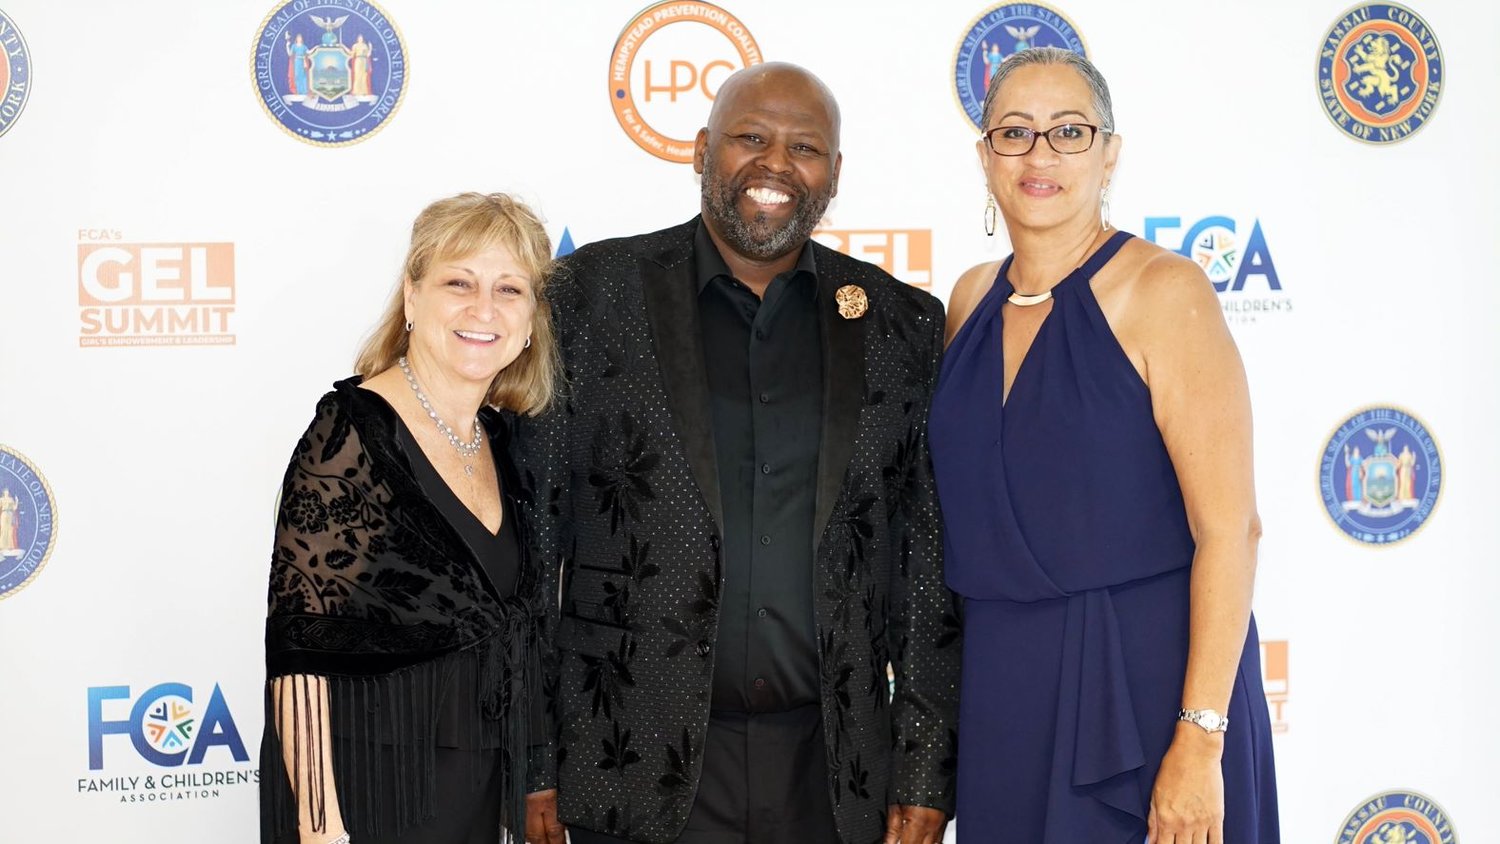 FCA’s Hempstead Prevention Coalition administers the GEL Summit. HPC director Thurston O’Neal, center, attended the May 17 graduation event, as did Donna Teichner, LCSW,  assistant vice president of Prevention and Family Support FCA, and JoAnn Alexander, FCA administrative coordinator.